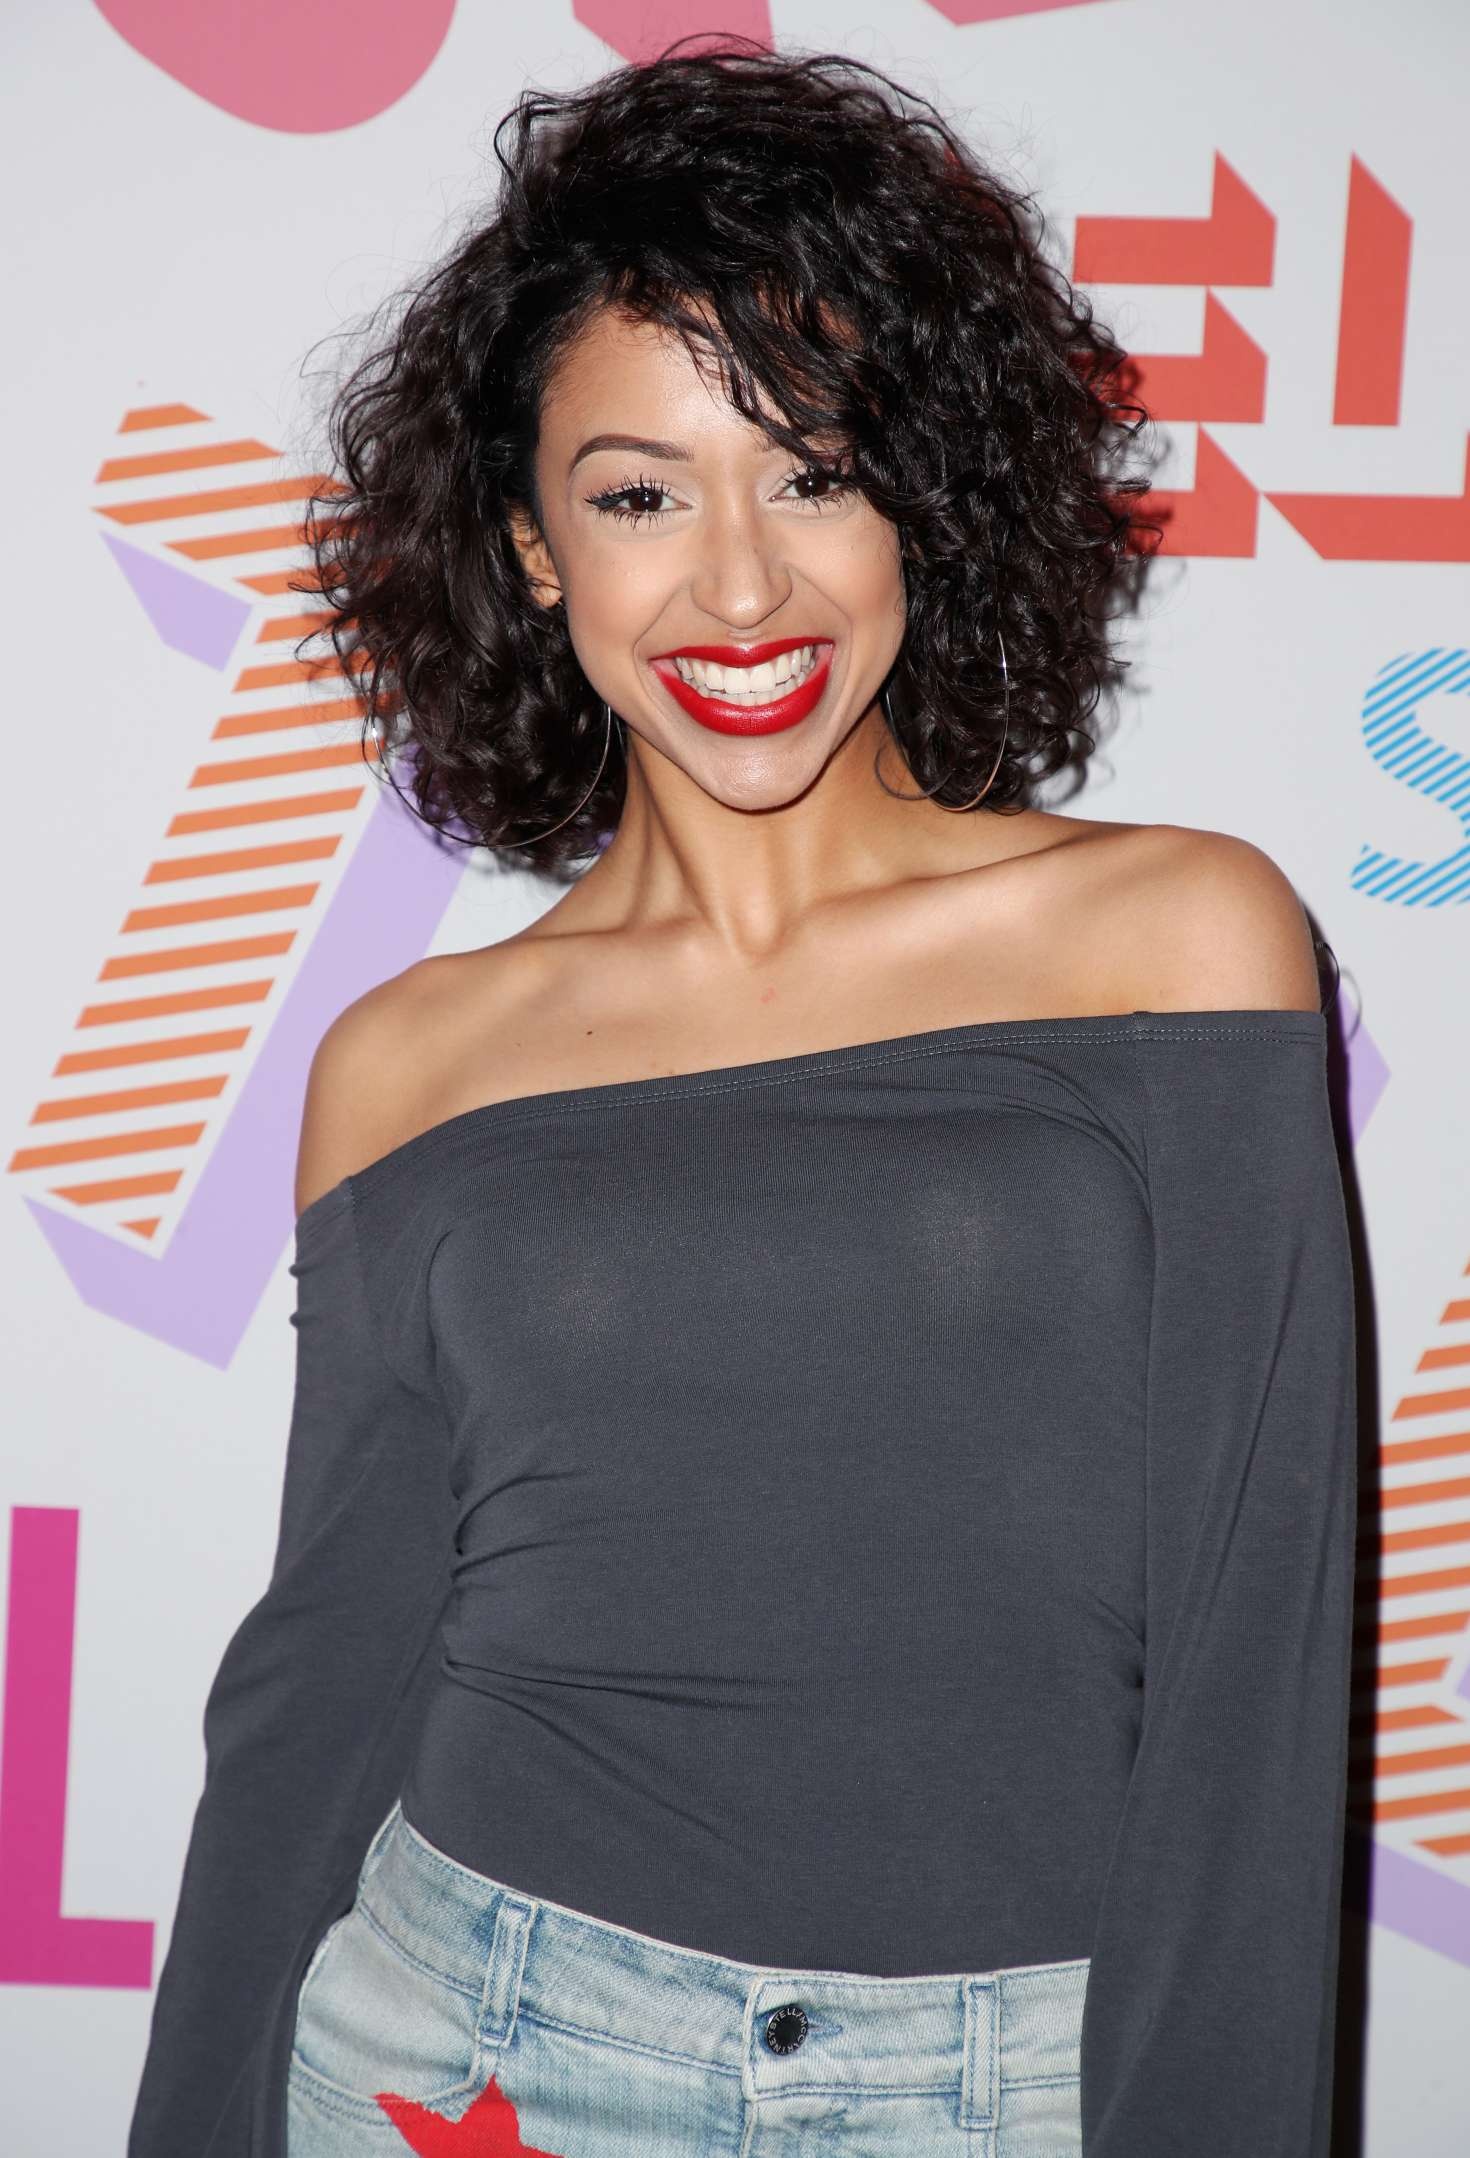 Liza Koshy: The fastest YouTube personality to reach 10 million subscribers. 1470x2160 HD Wallpaper.